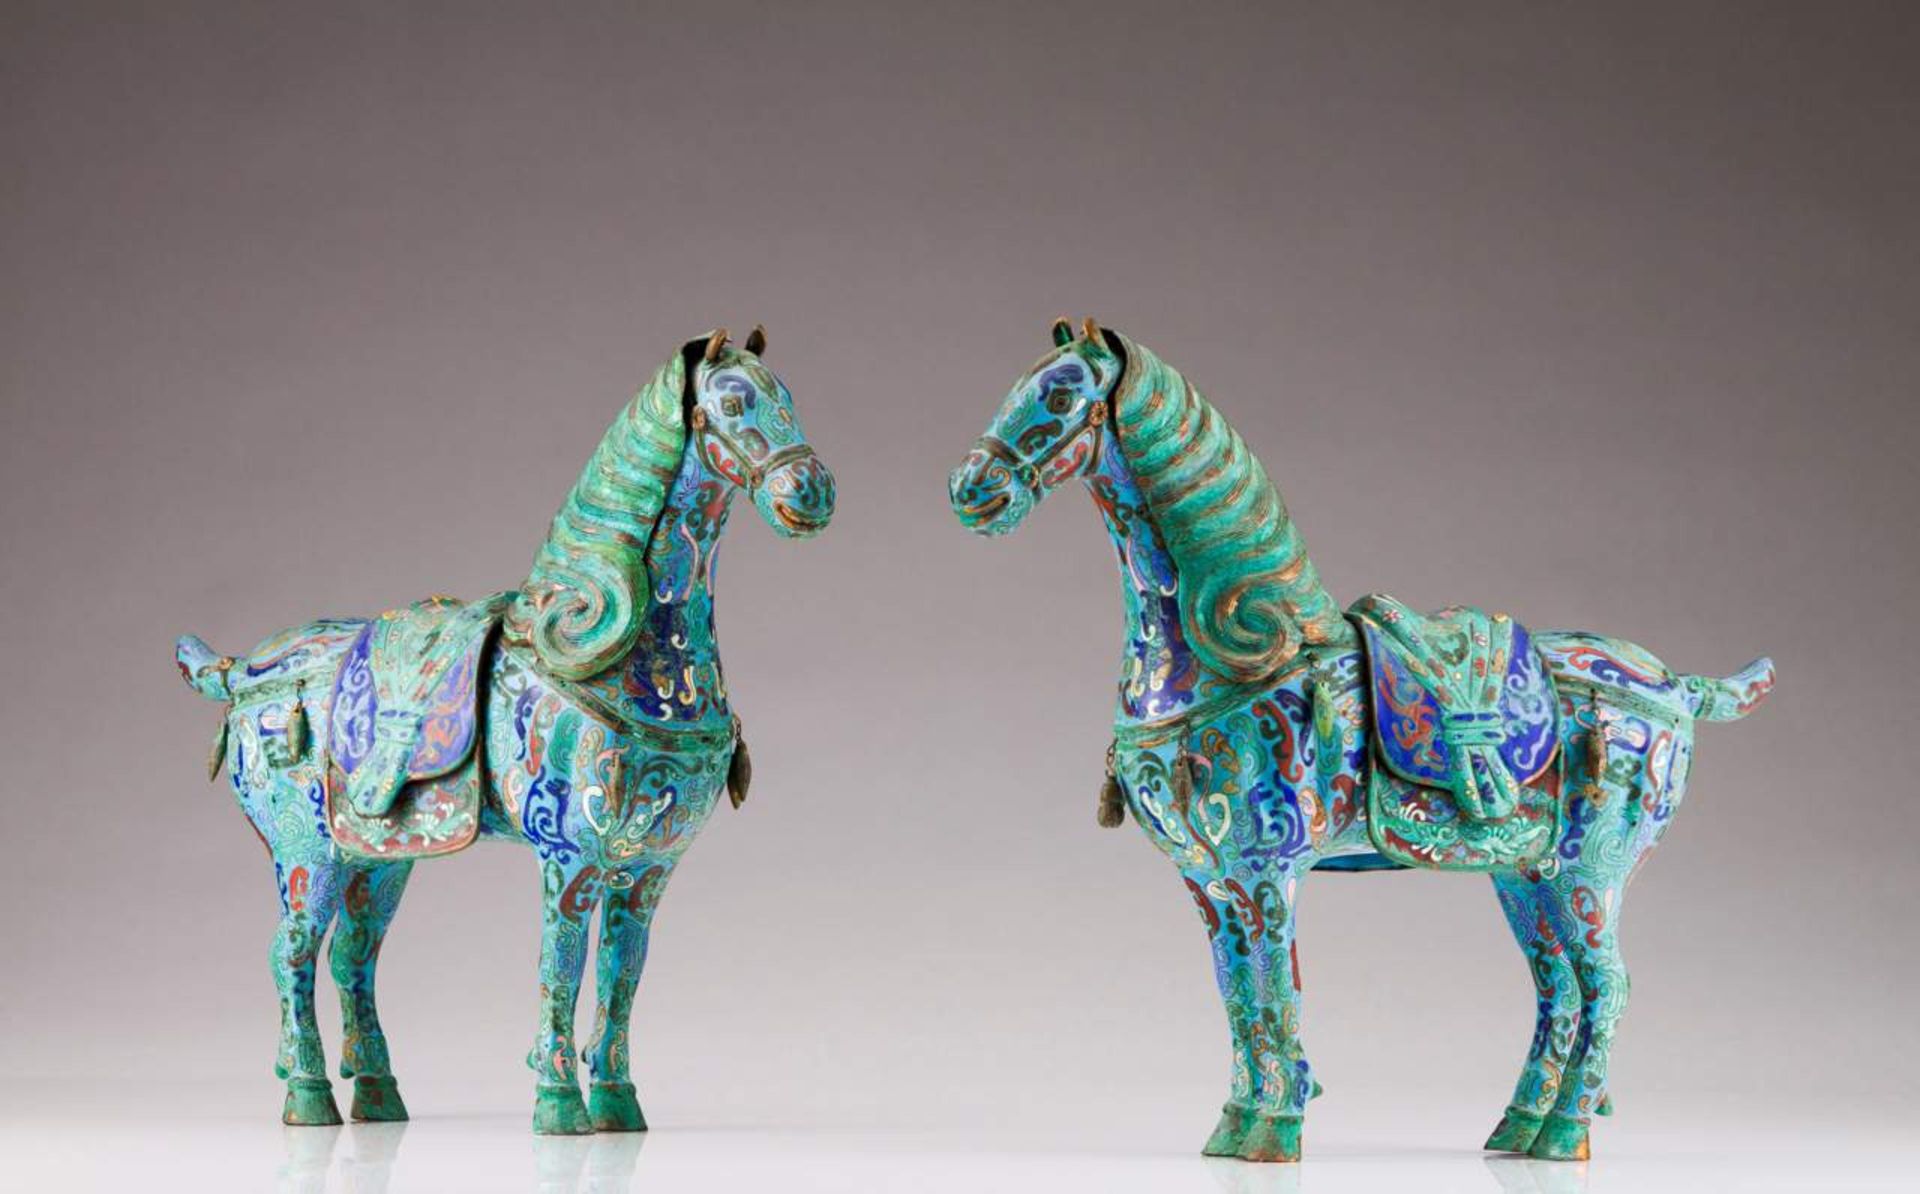 A pair of late 19th, early 20th century Chinese cloisonné sculptures
Representing horses